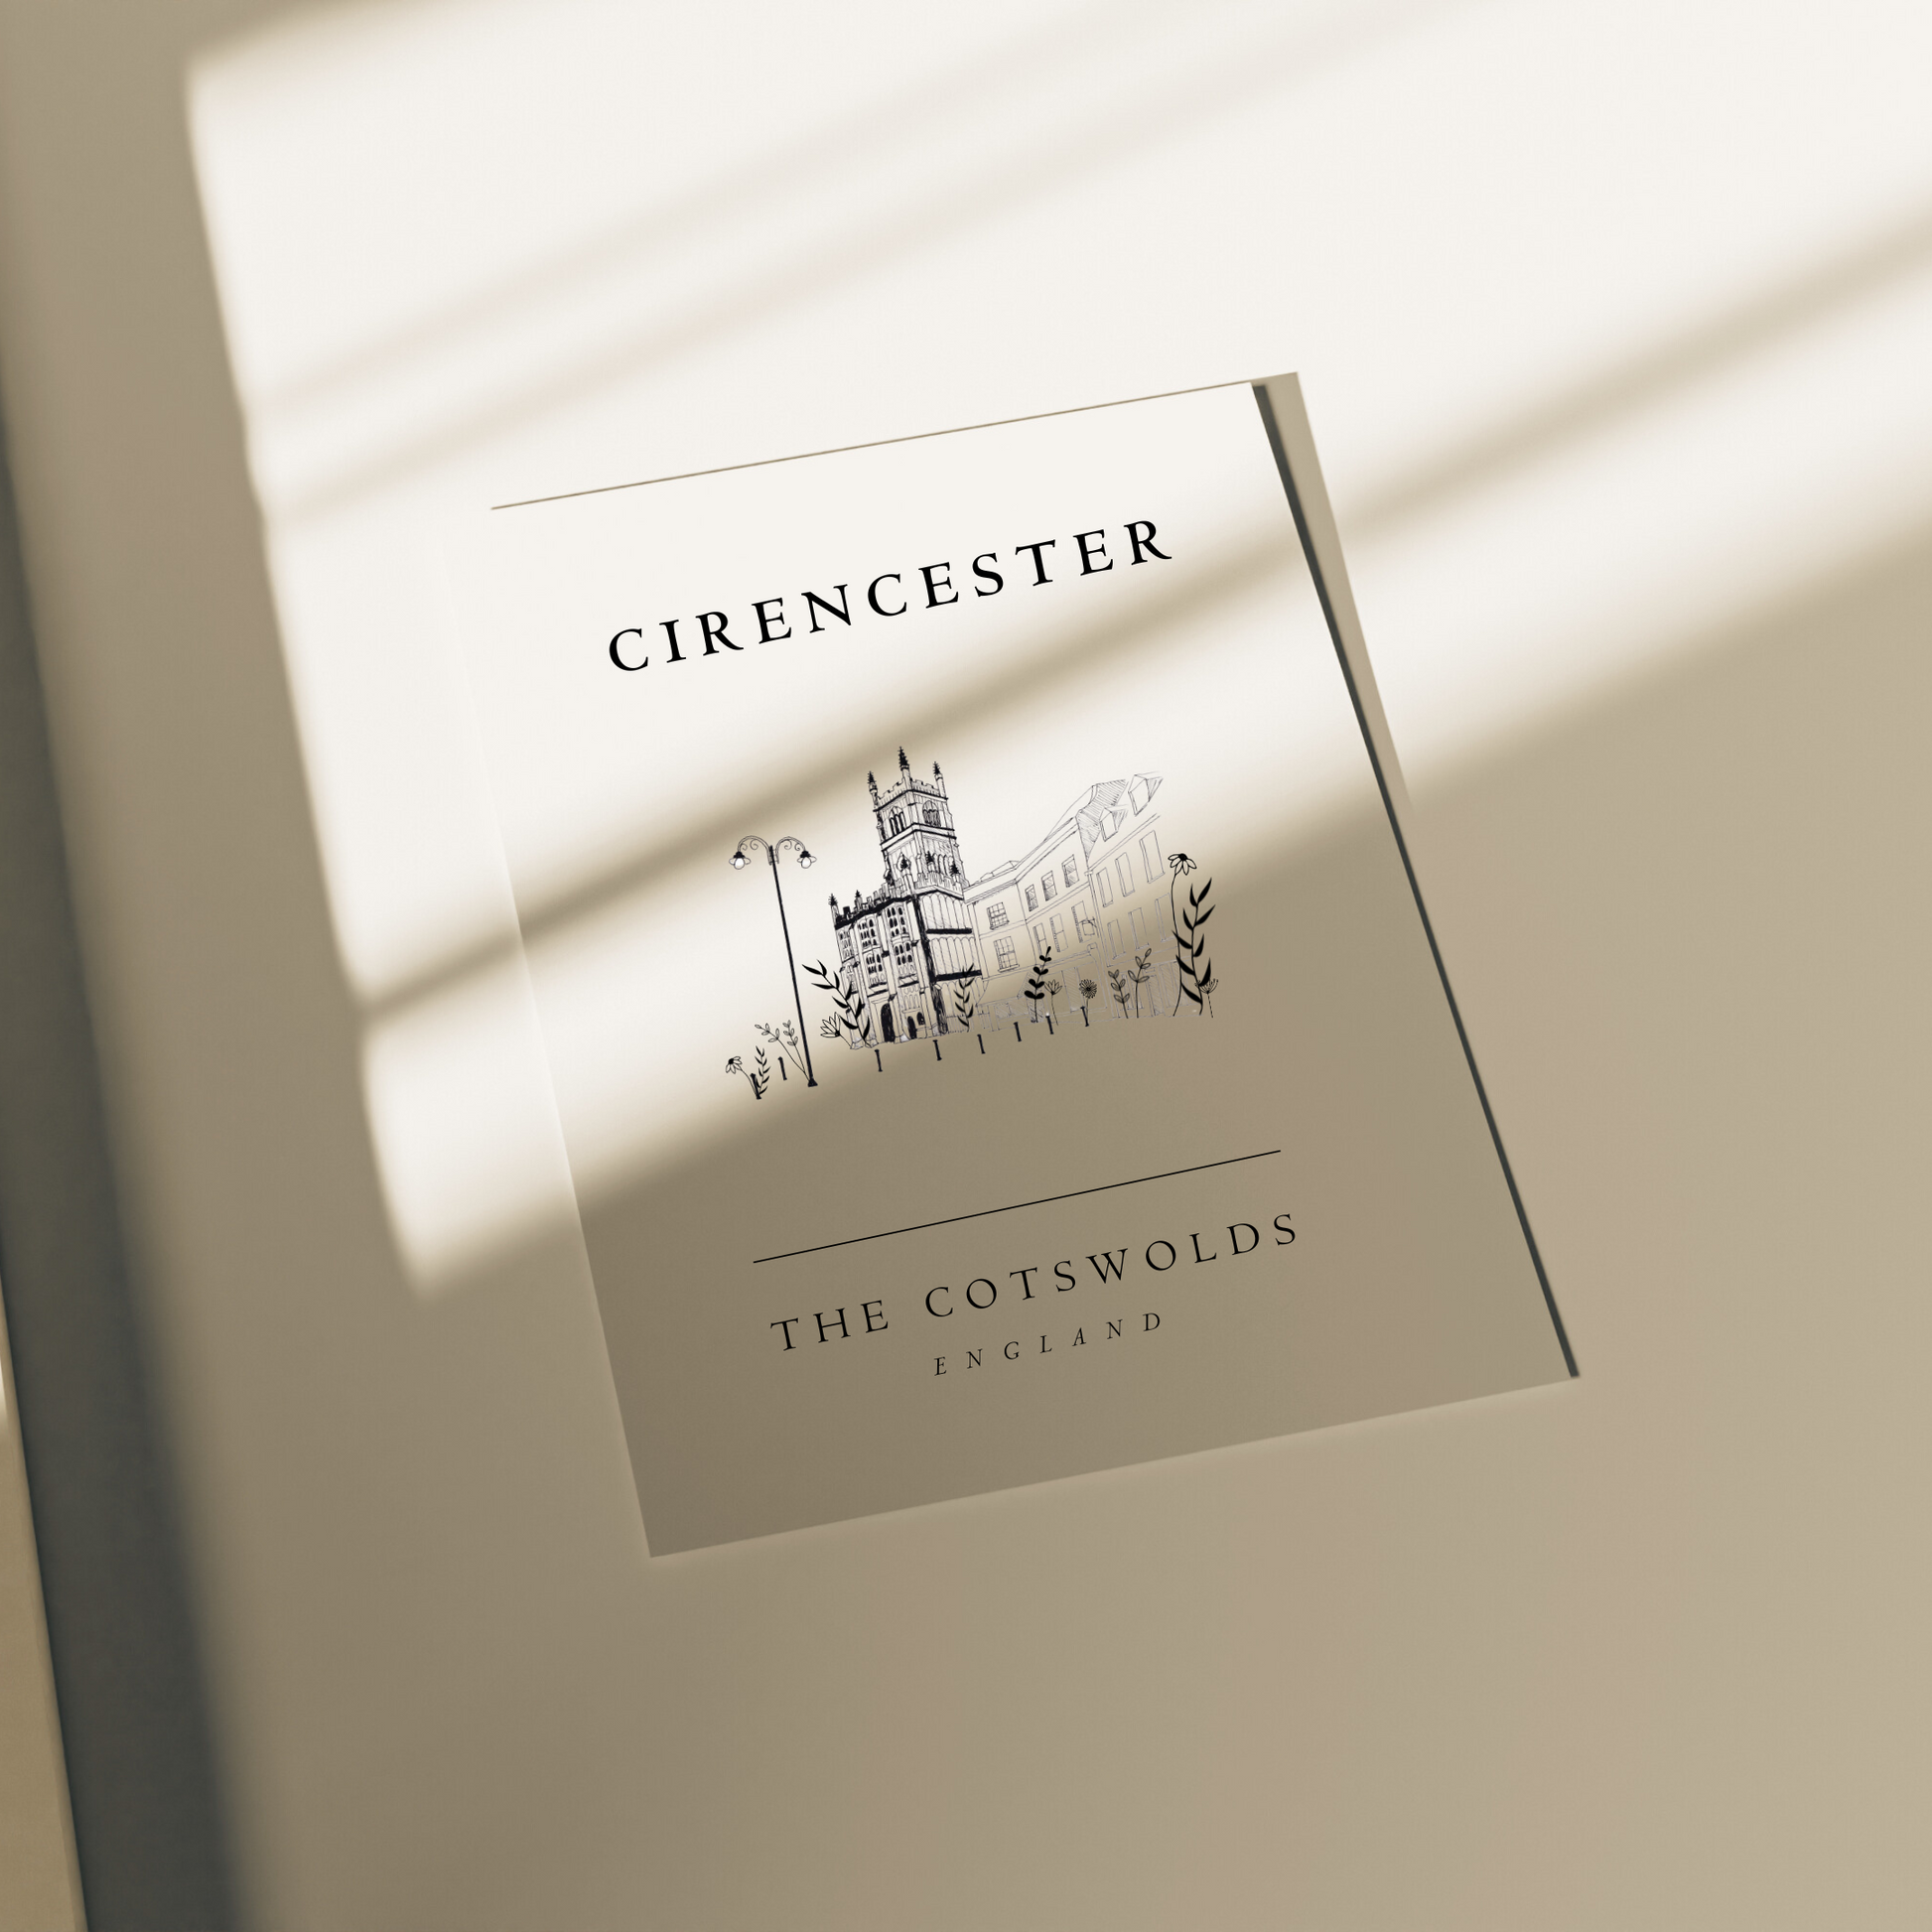 Cirencester Cotswolds Wall Art | A4 Print - The Cotswold Illustrated Company